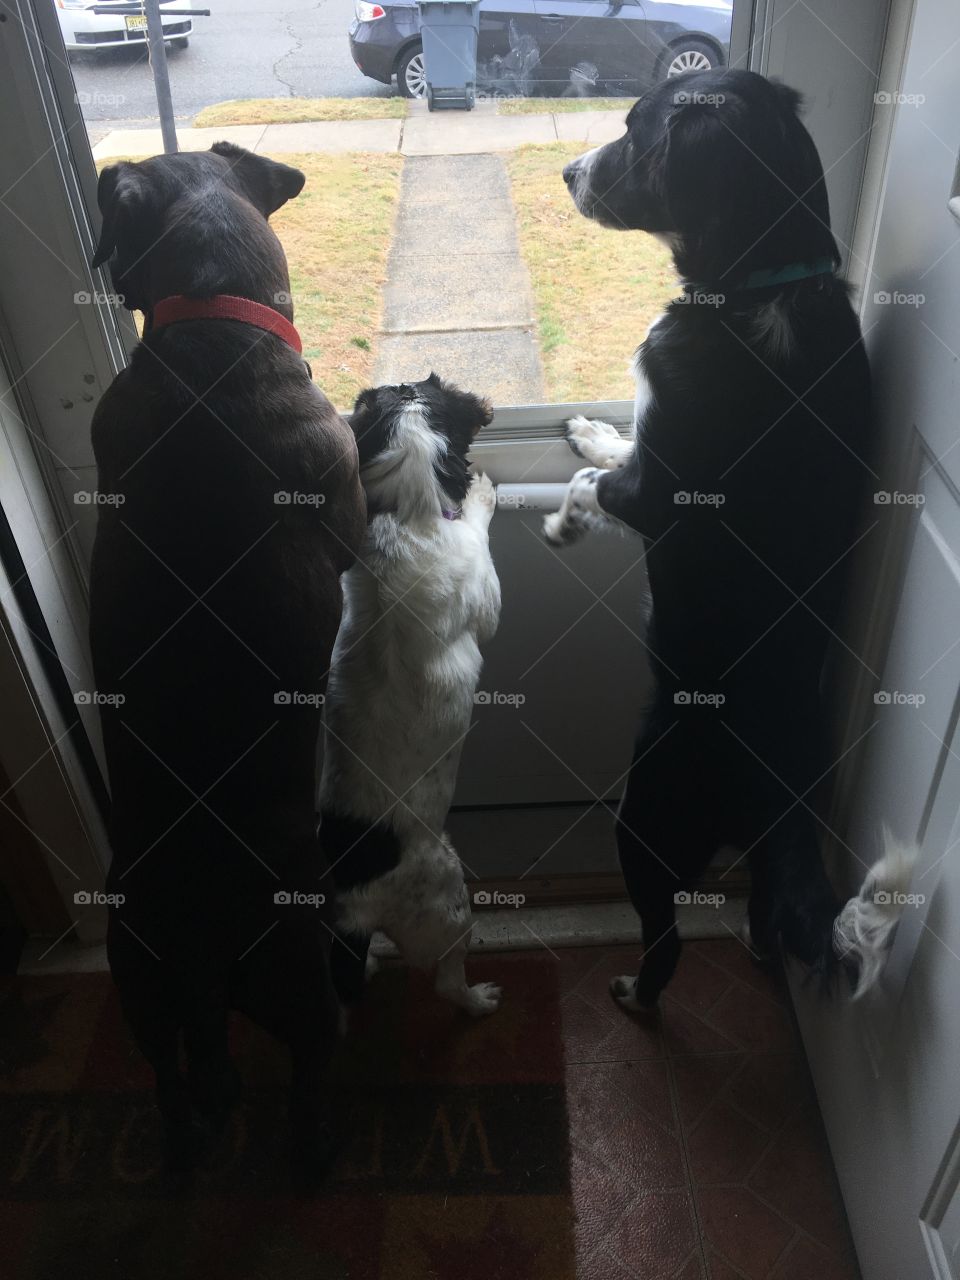 australlian shepard britney spaniel, pit bull labrador, and jack russle beagle mix looking out the window